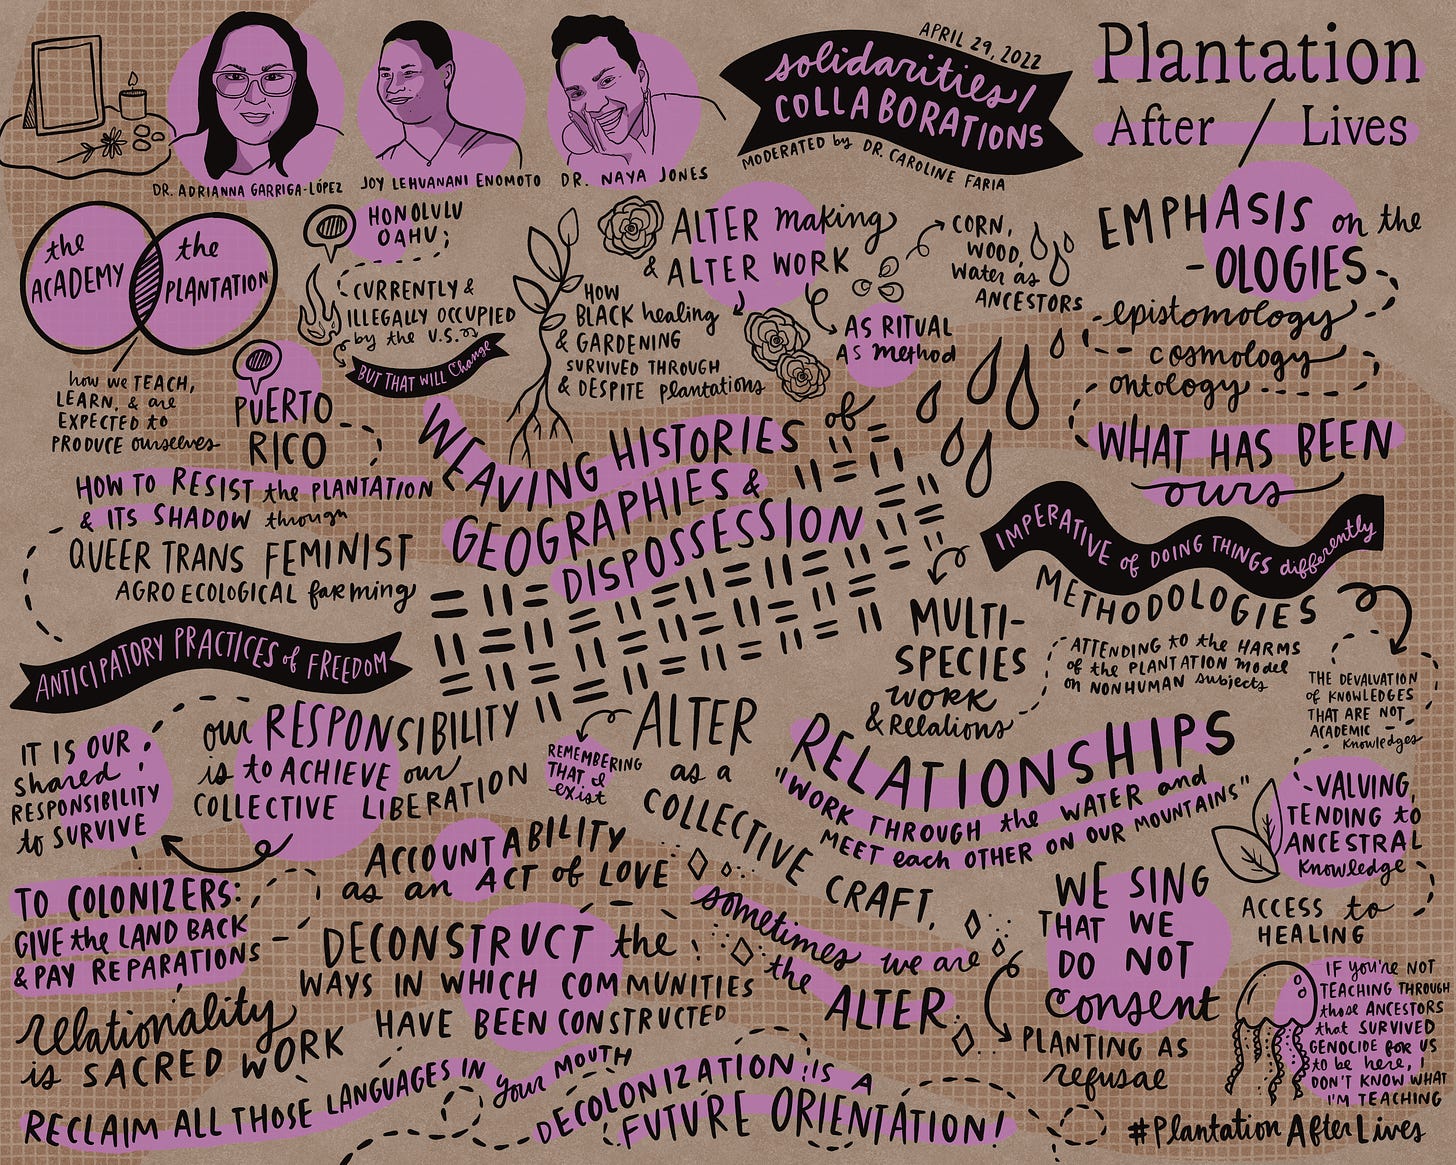 Graphic Recording of the Solidarities/Collaboration panel for the Plantation After/Lives Symposium